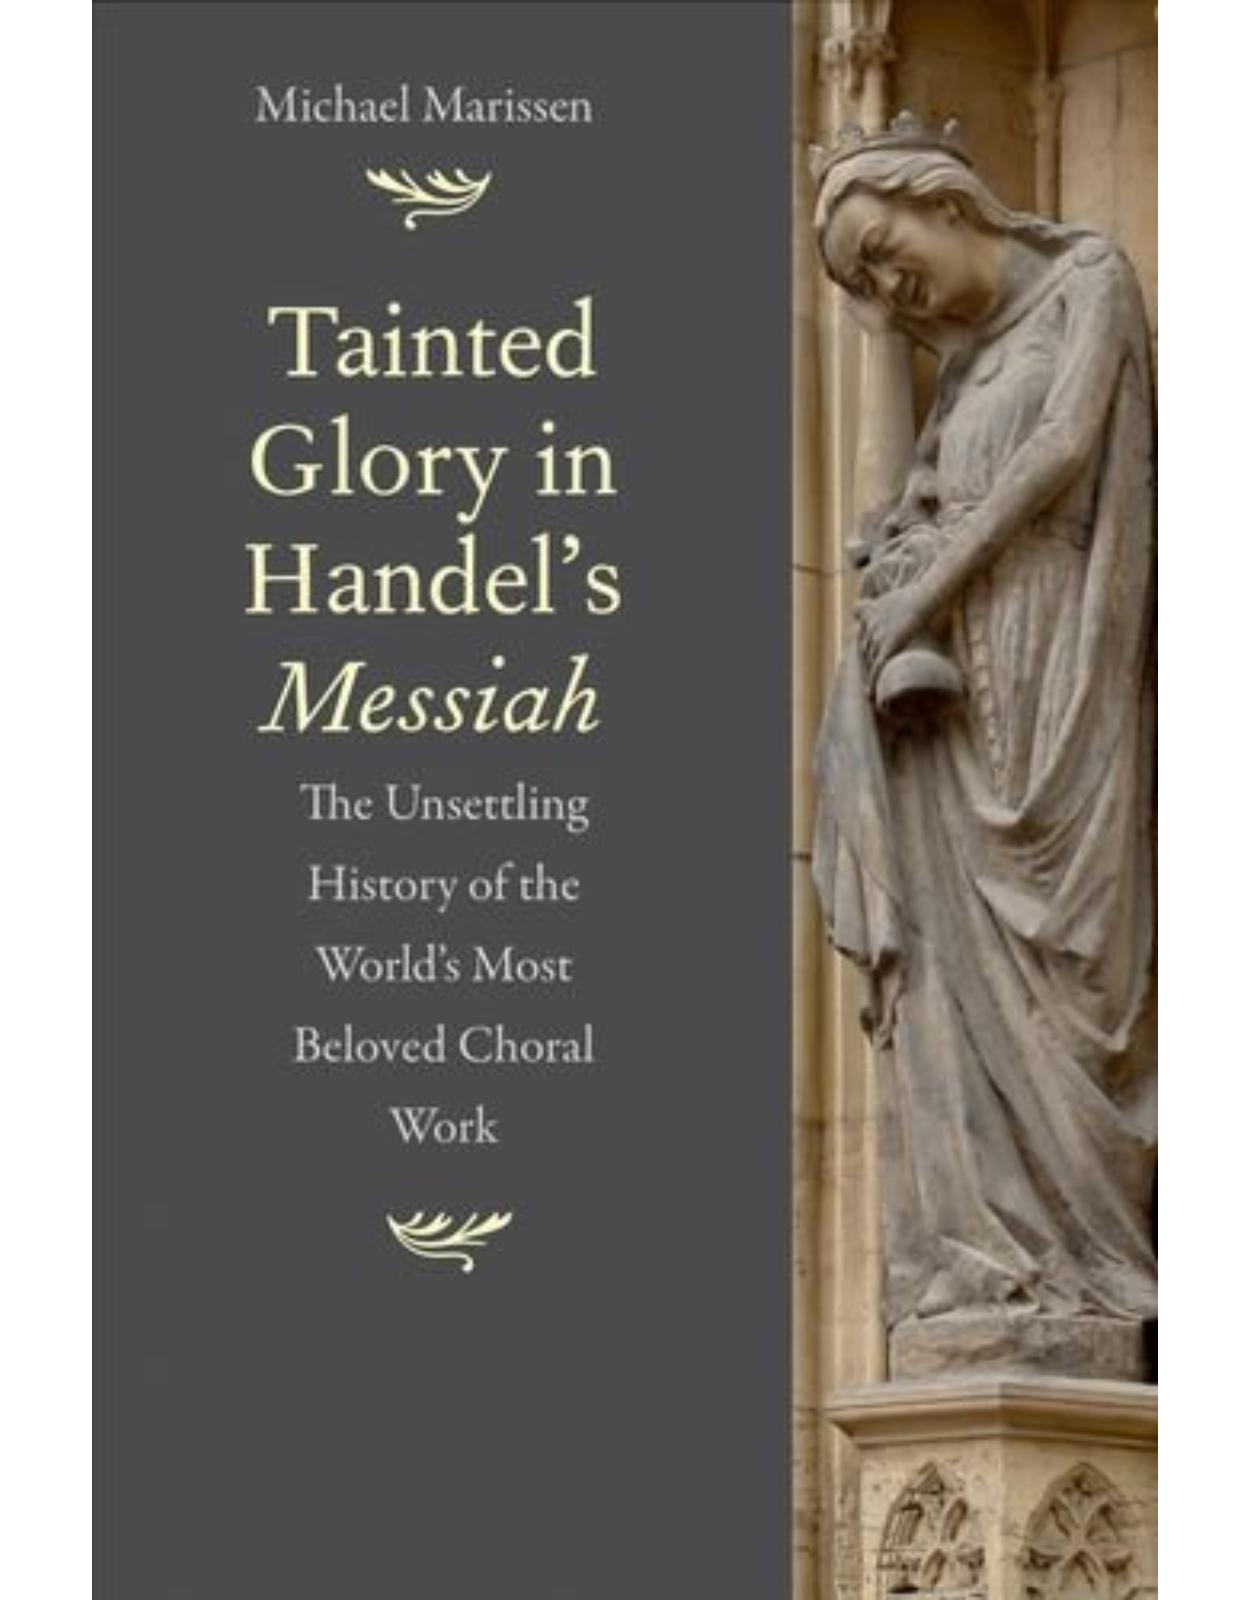 Tainted Glory in Handel's Messiah. The Unsettling History of the World's Most Beloved Choral Work